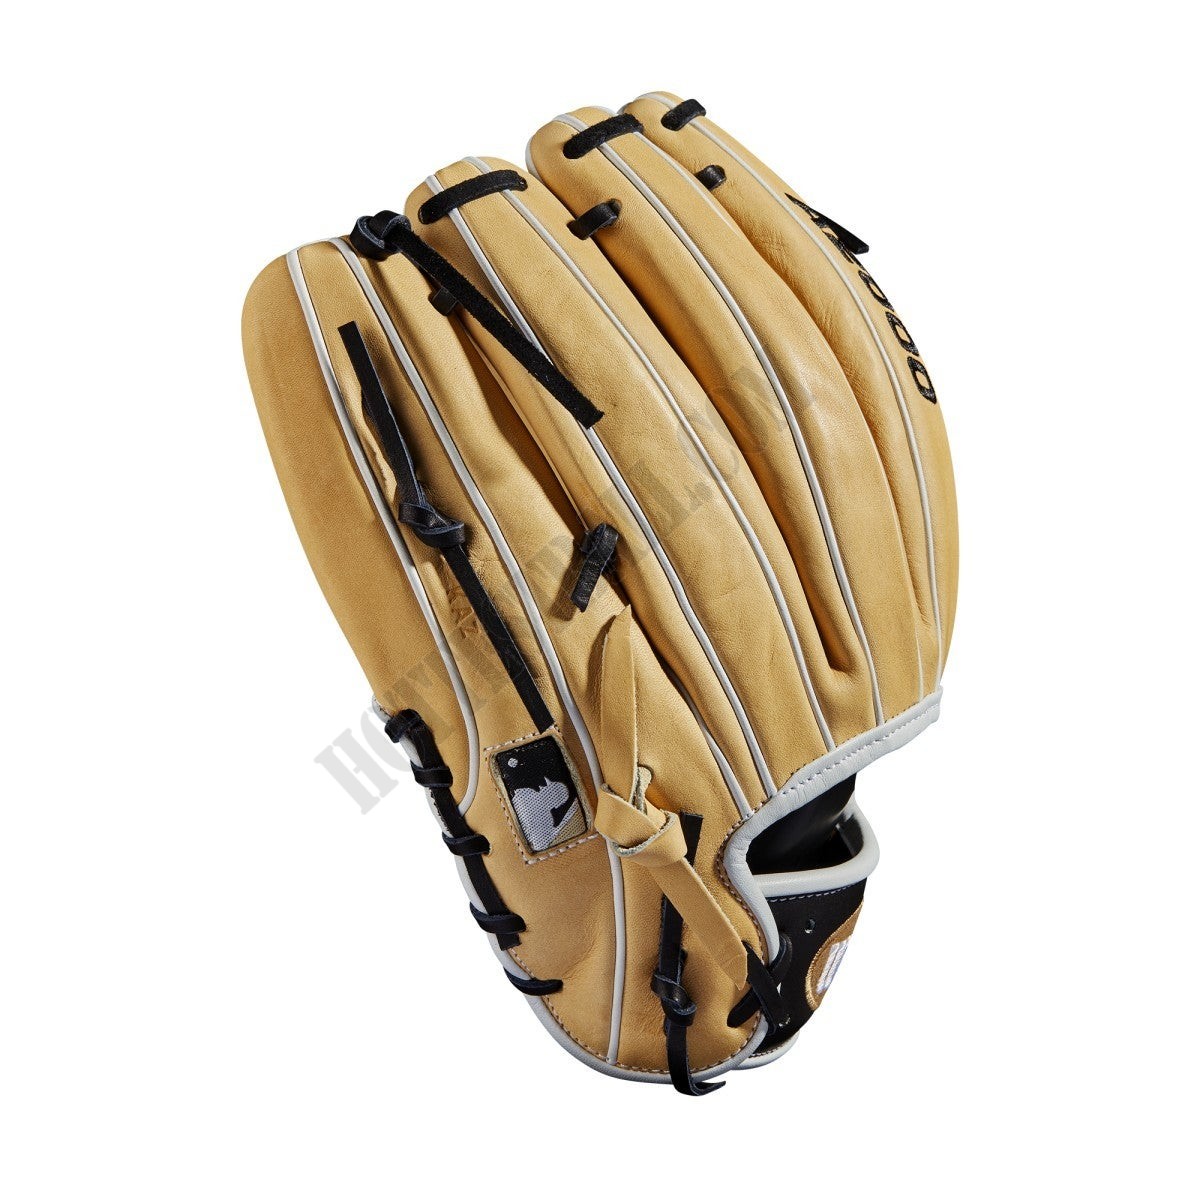 2019 A2000 1787 11.75" Infield Baseball Glove - Right Hand Throw ● Wilson Promotions - -4